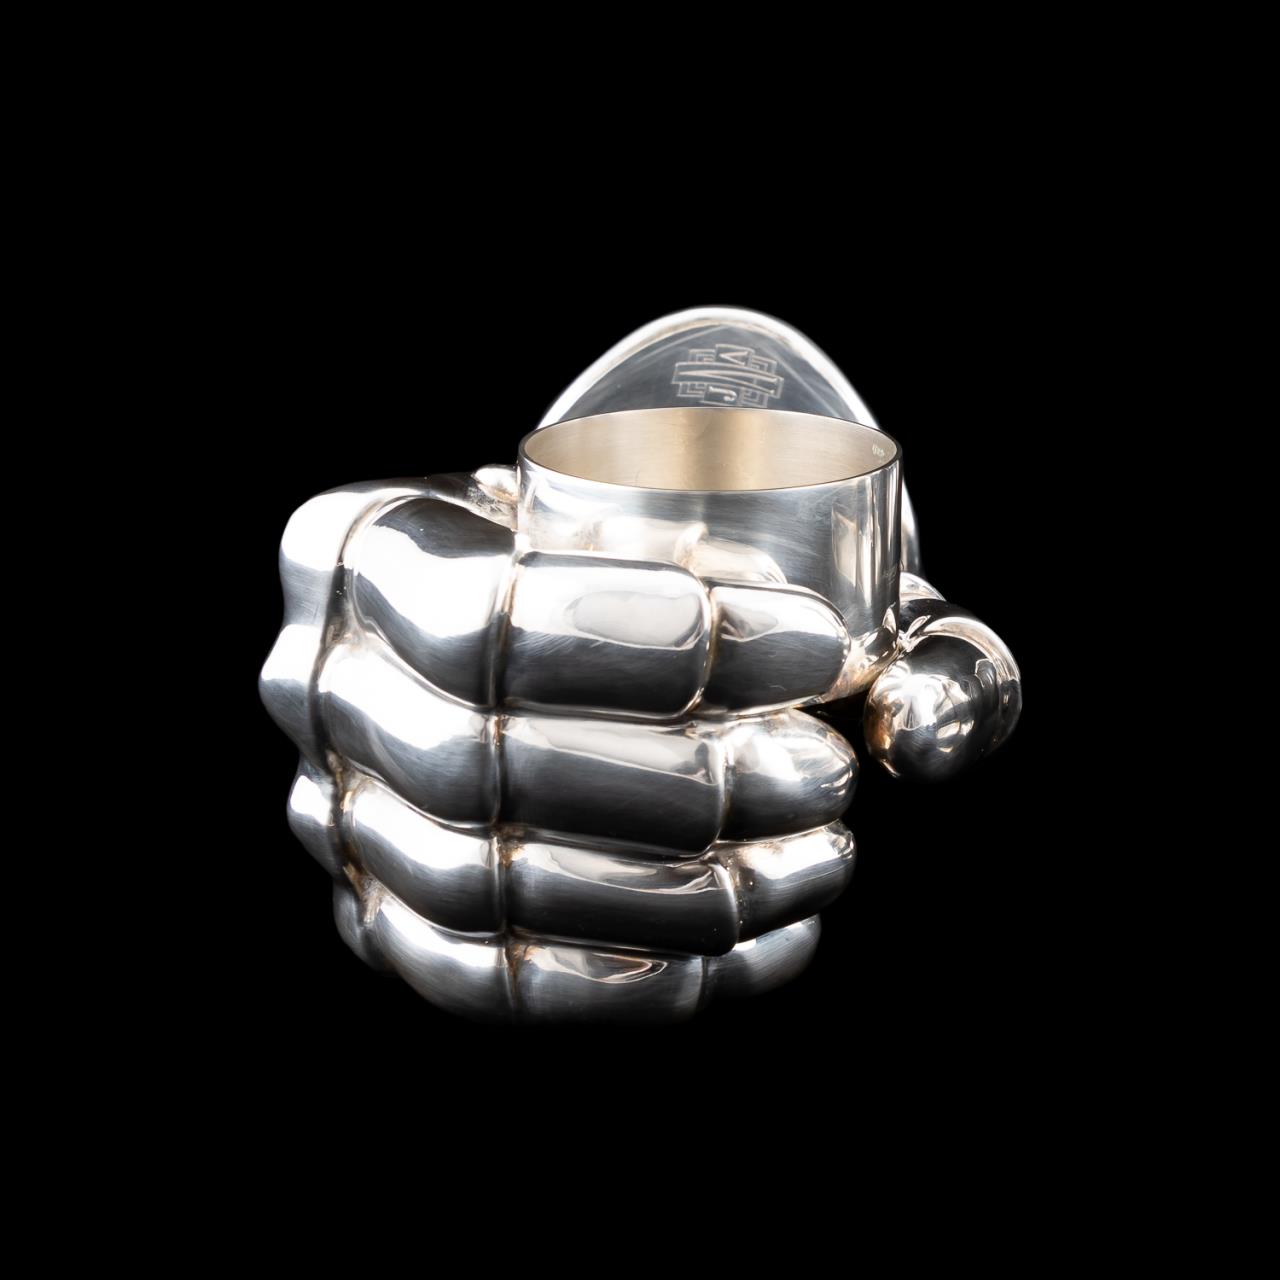 ASPREY STERLING "KNIGHT'S HAND" CANDLEHOLDER - Image 4 of 8